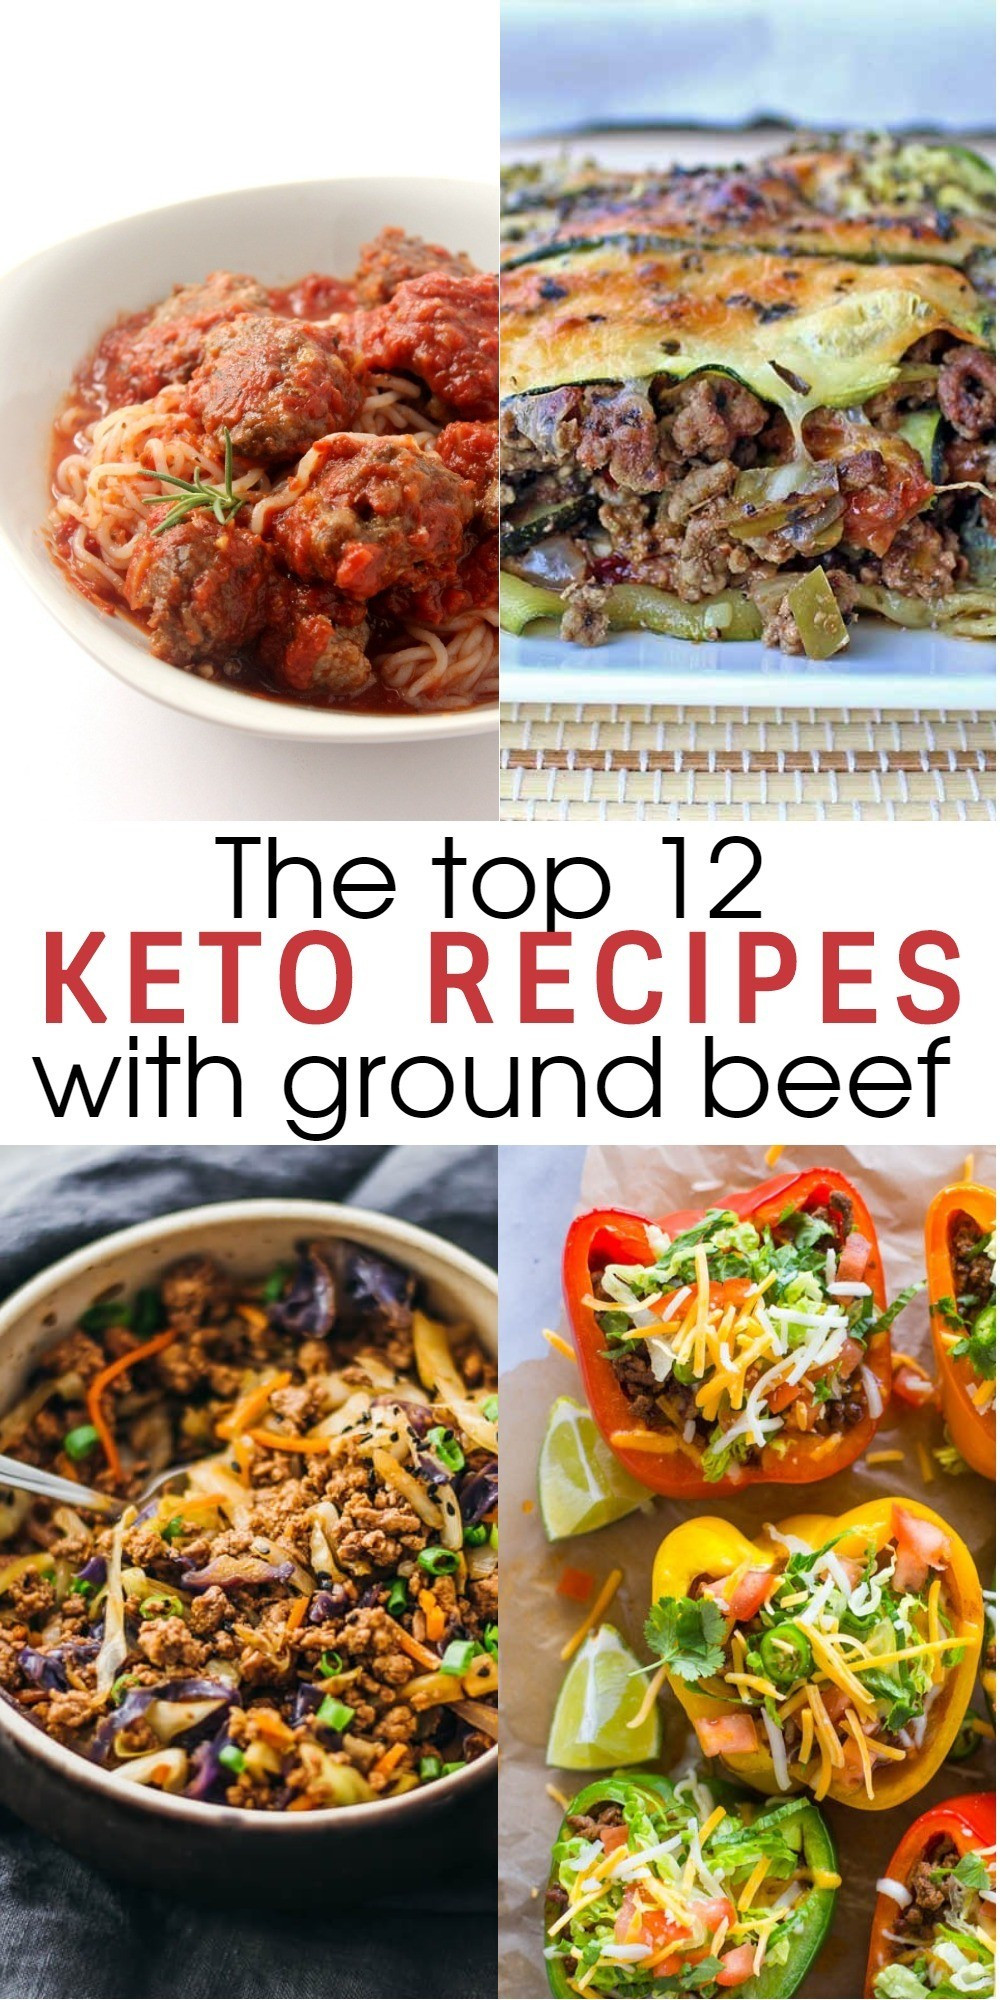 Ground Beef Keto Recipes Low Carb
 12 Flavorful and Easy Keto Recipes With Ground Beef To Try